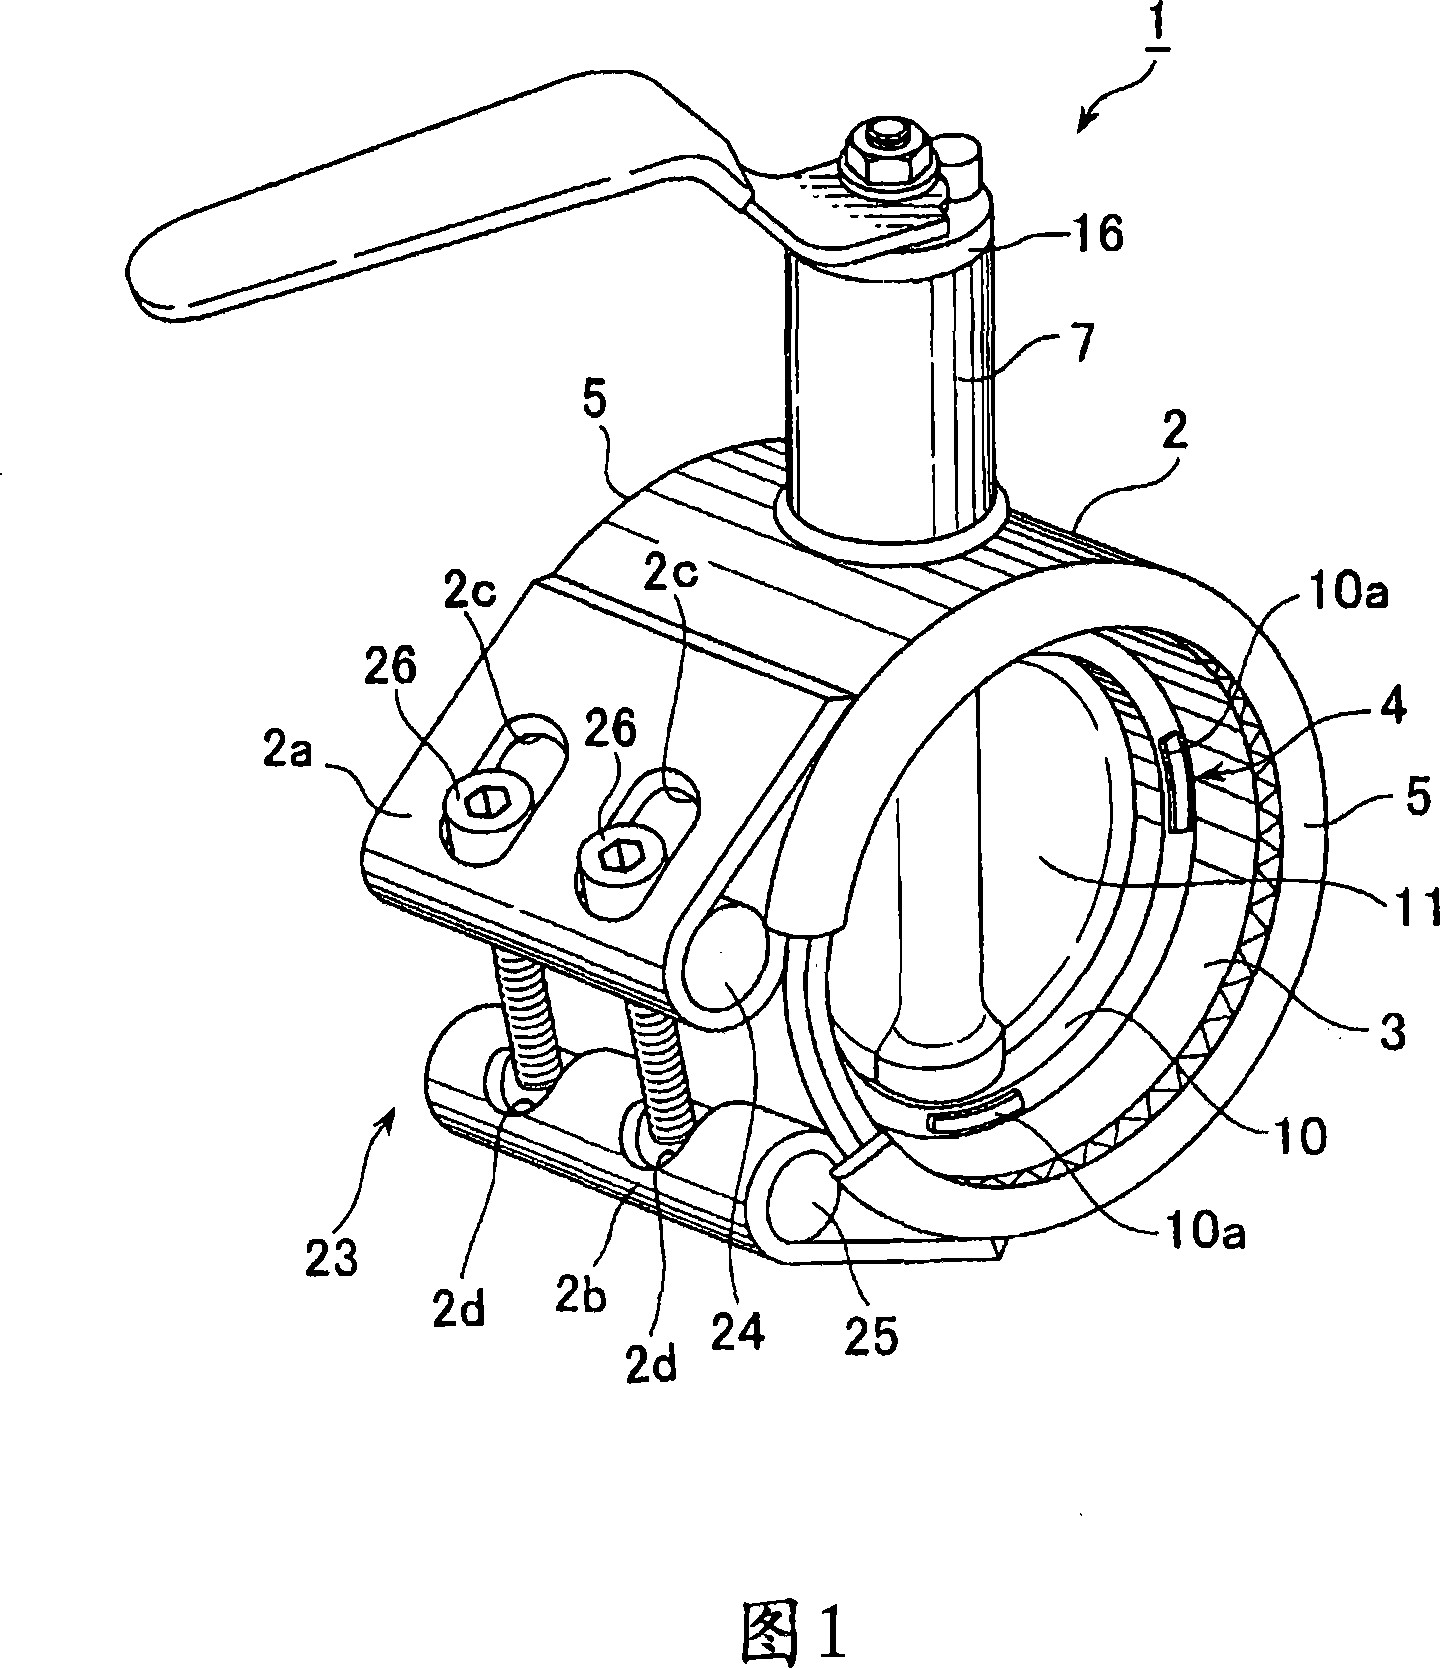 Valve with diameter-reduced joint part, joint for diameter reduction, and pipe system using these valve and joint